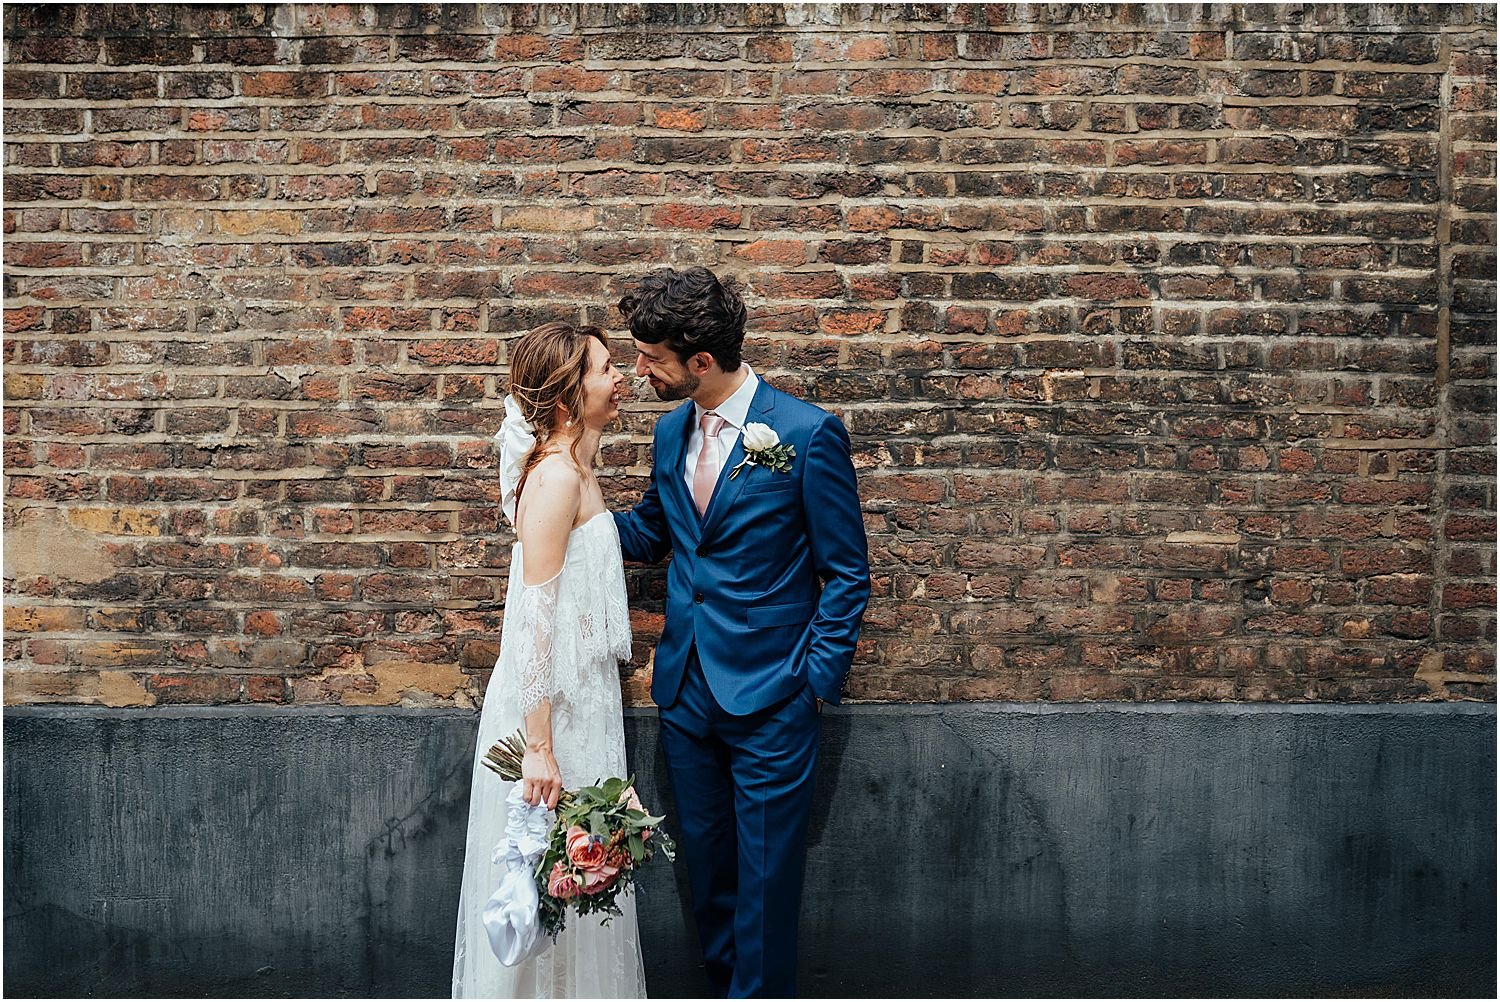 Bride and groom photo with brick wall